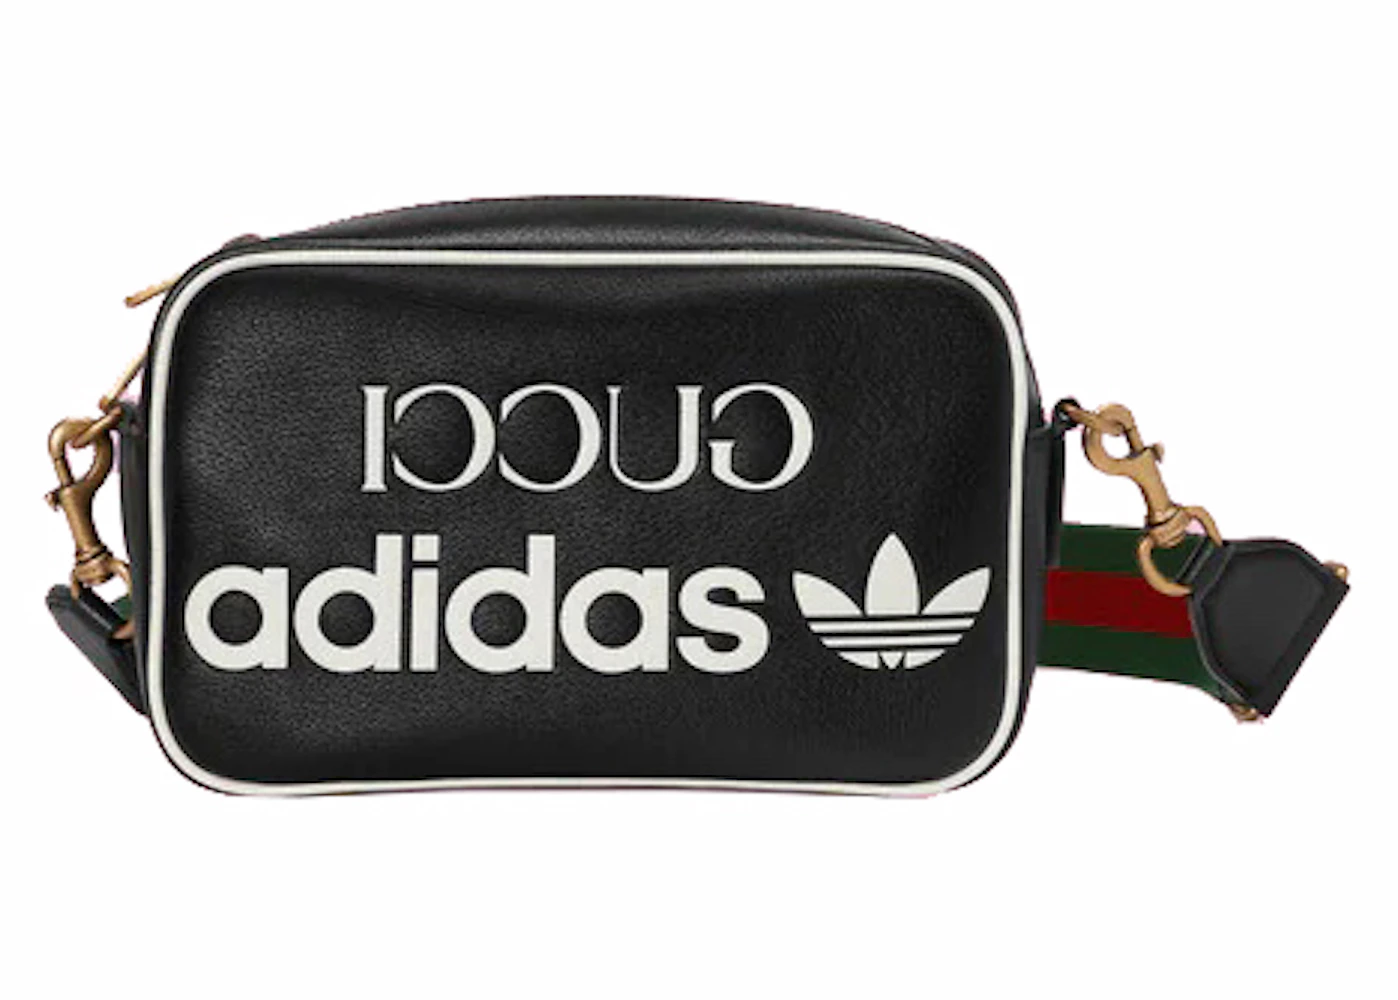 Nietje Bejaarden lengte Gucci x adidas Small Shoulder Bag Black in Leather with Gold-tone - US